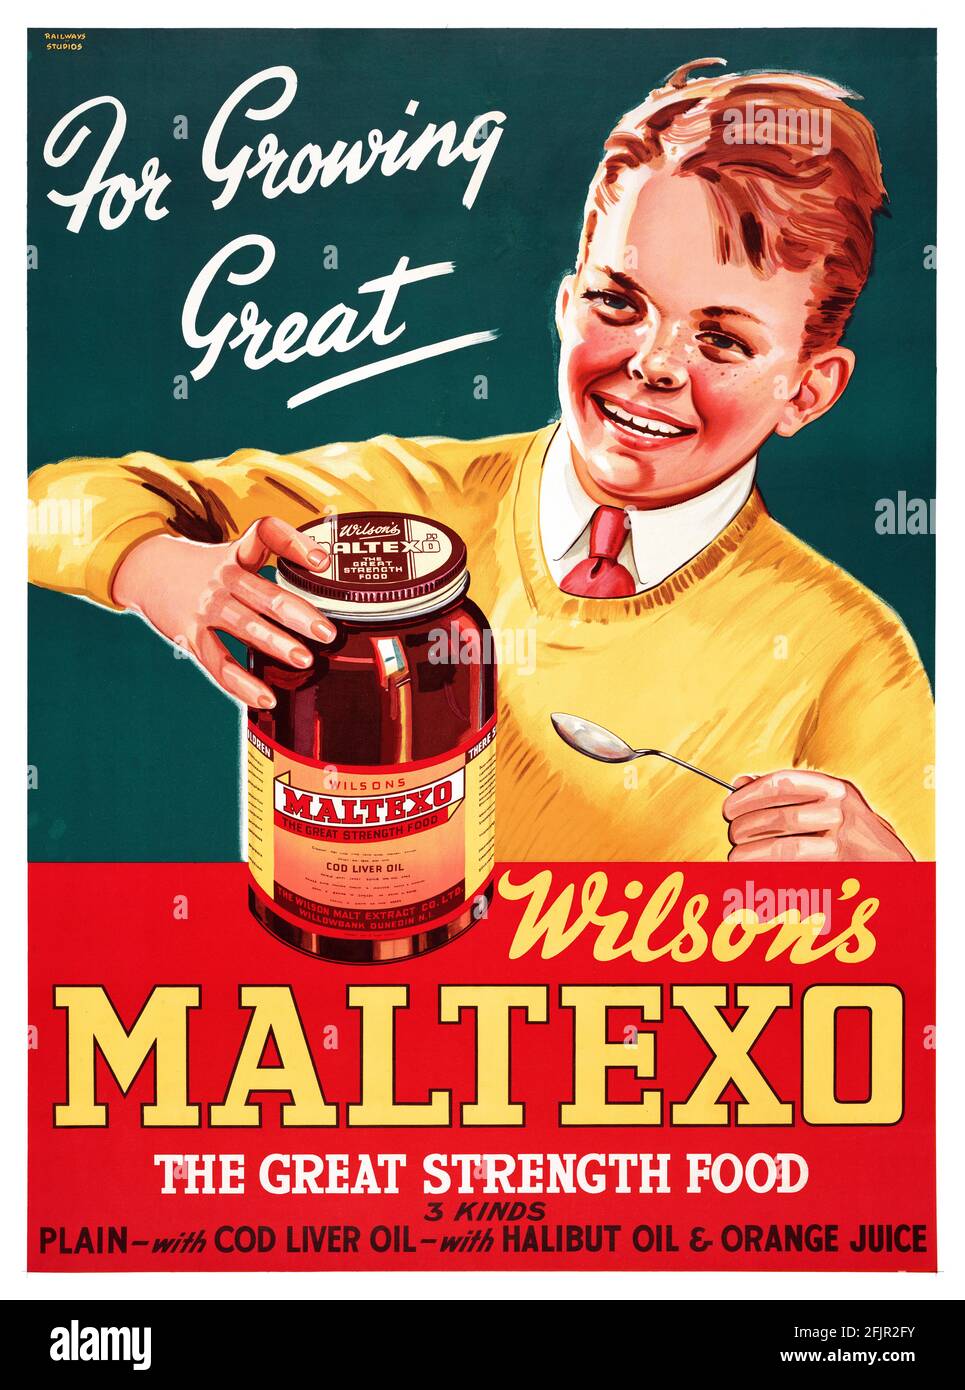 Wilson's Maltexo: For Growing Great by Railways Studios. Restored vintage poster published approx. 1940 in New Zealand. Stock Photo